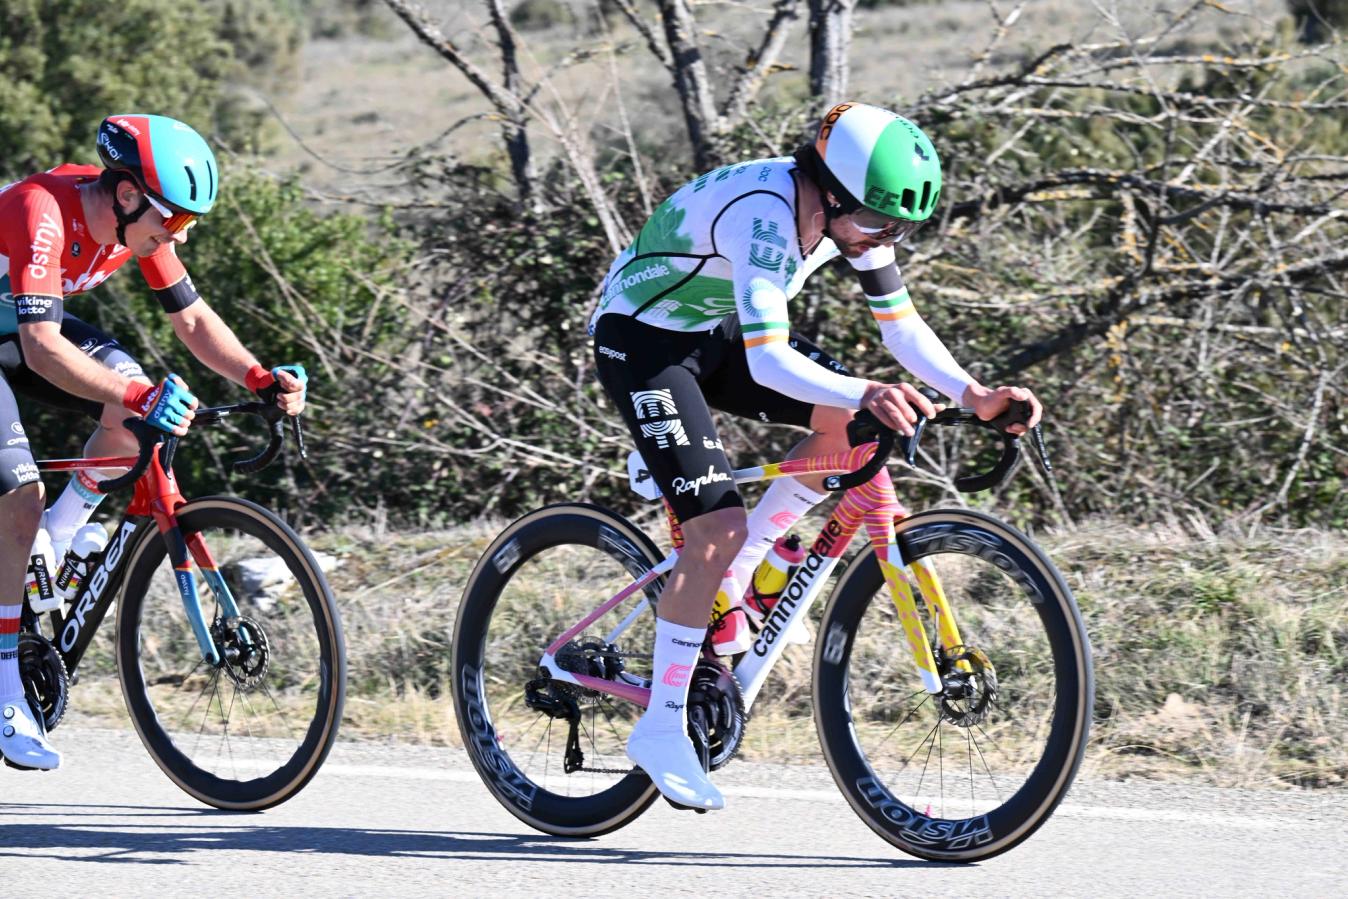 Aero-obsessed Ben Healy is one of the riders pushing the limits of the sock height rule